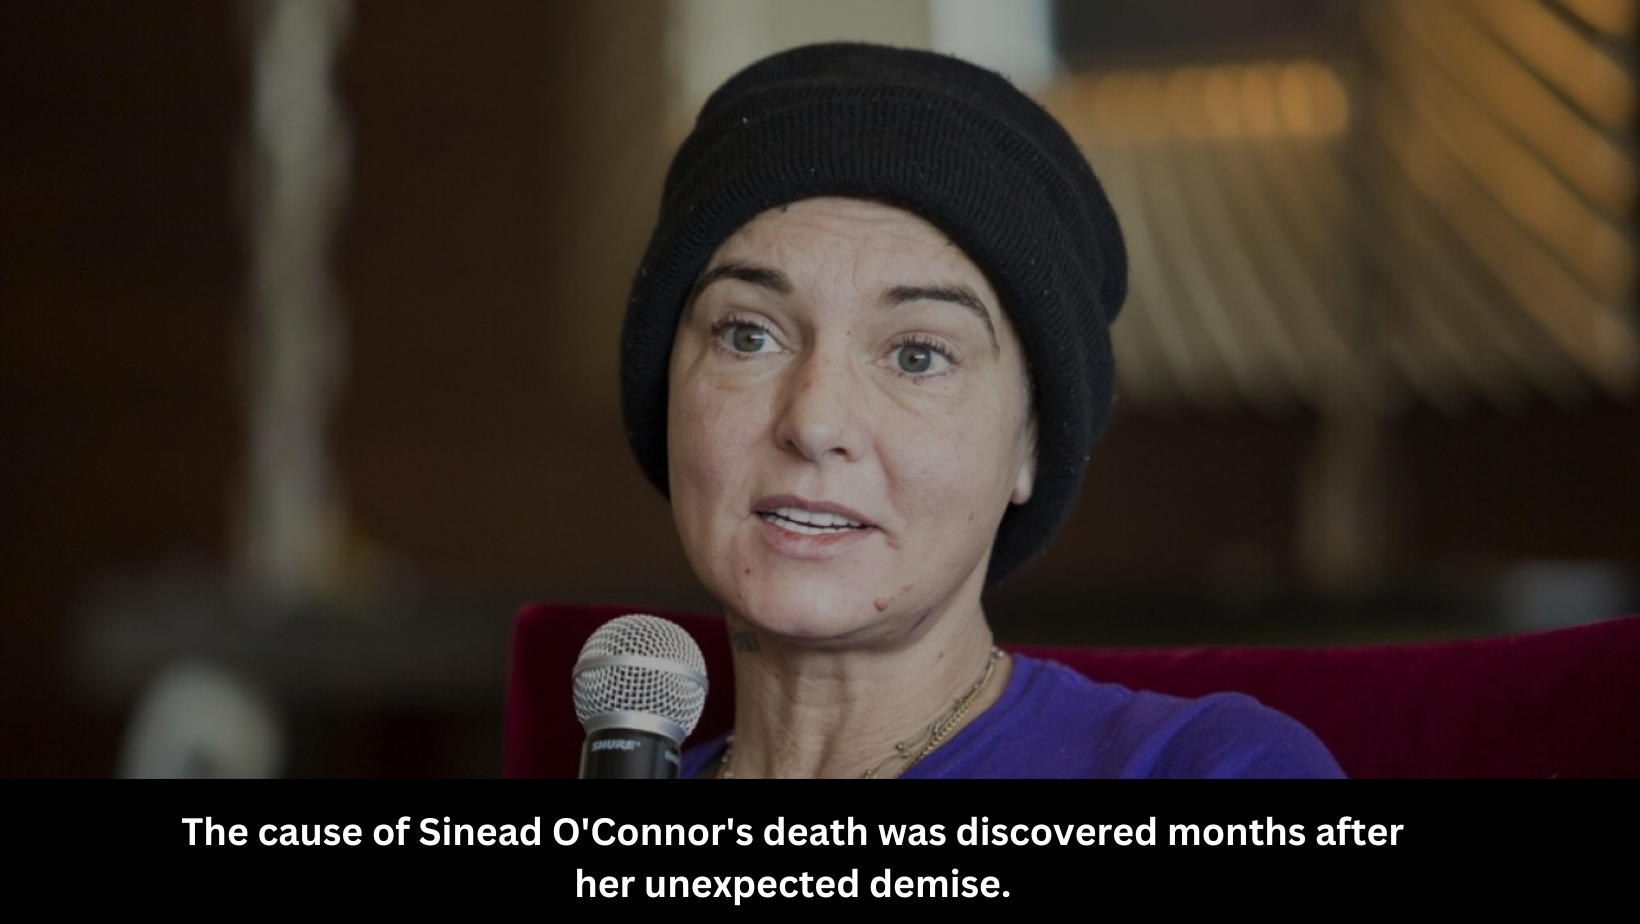 The cause of Sinead O'Connor's death was discovered months after her unexpected demise.